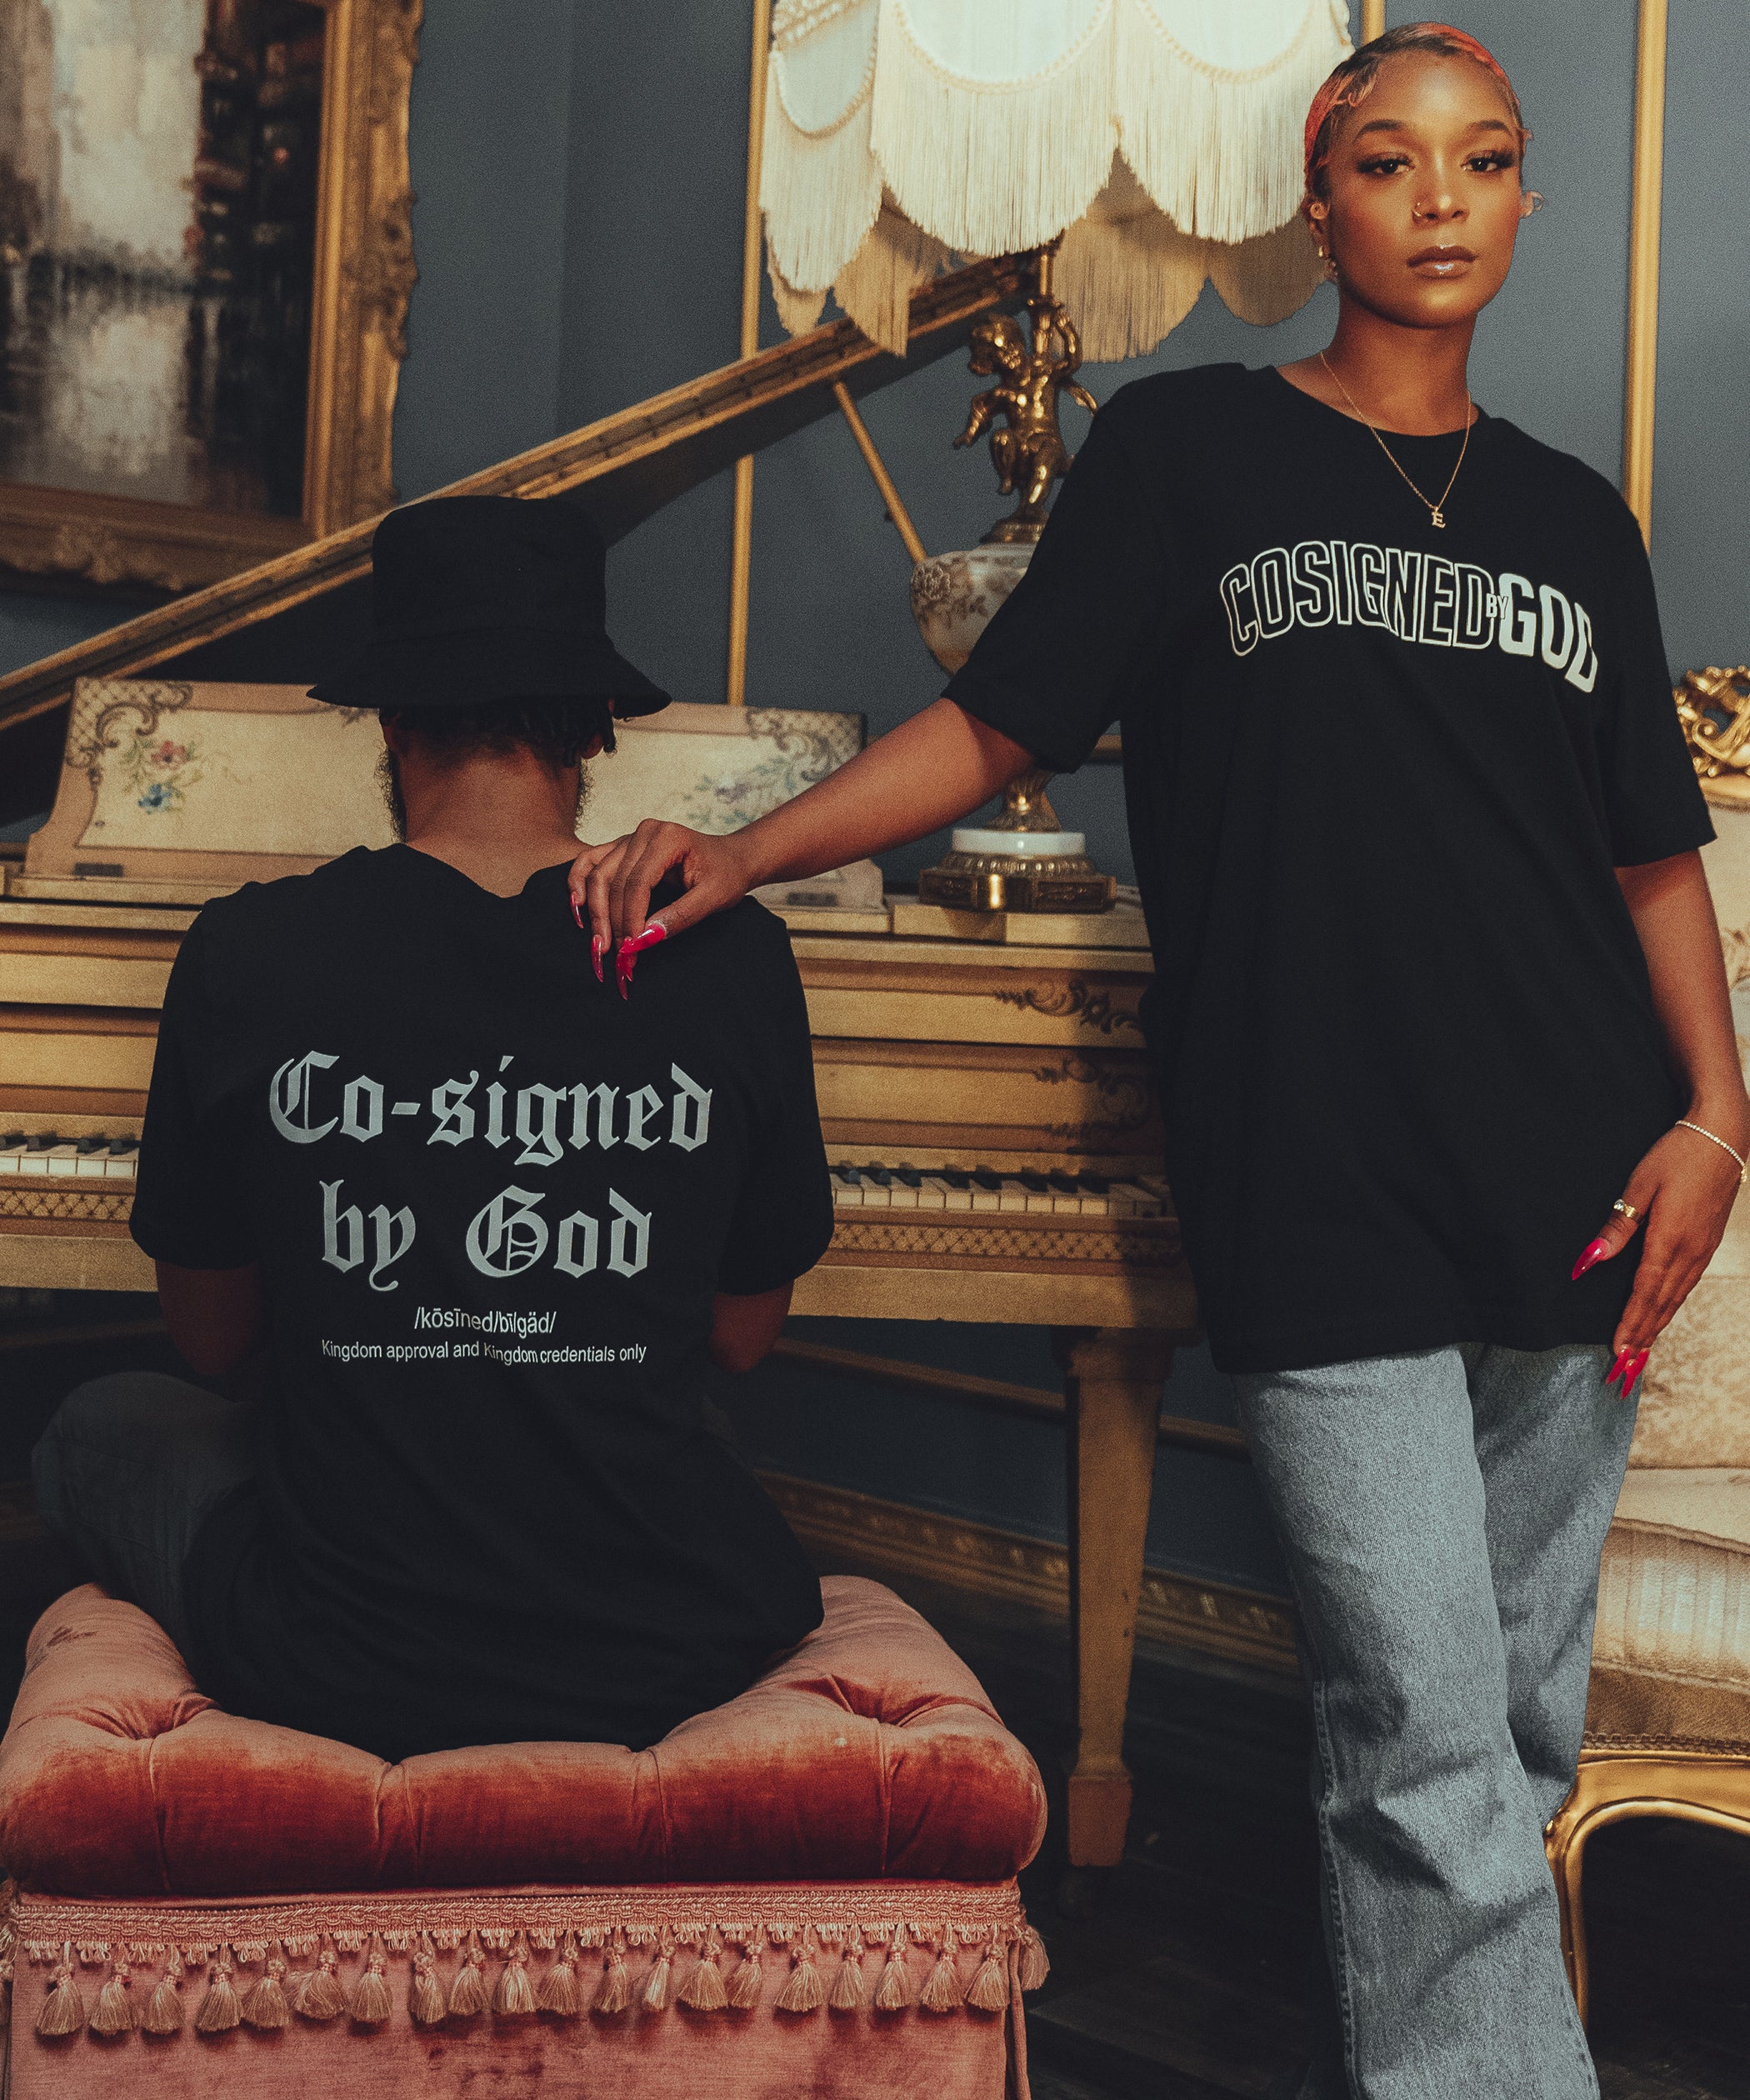 Christian Streetwear Brands Mix Faith and Commerce